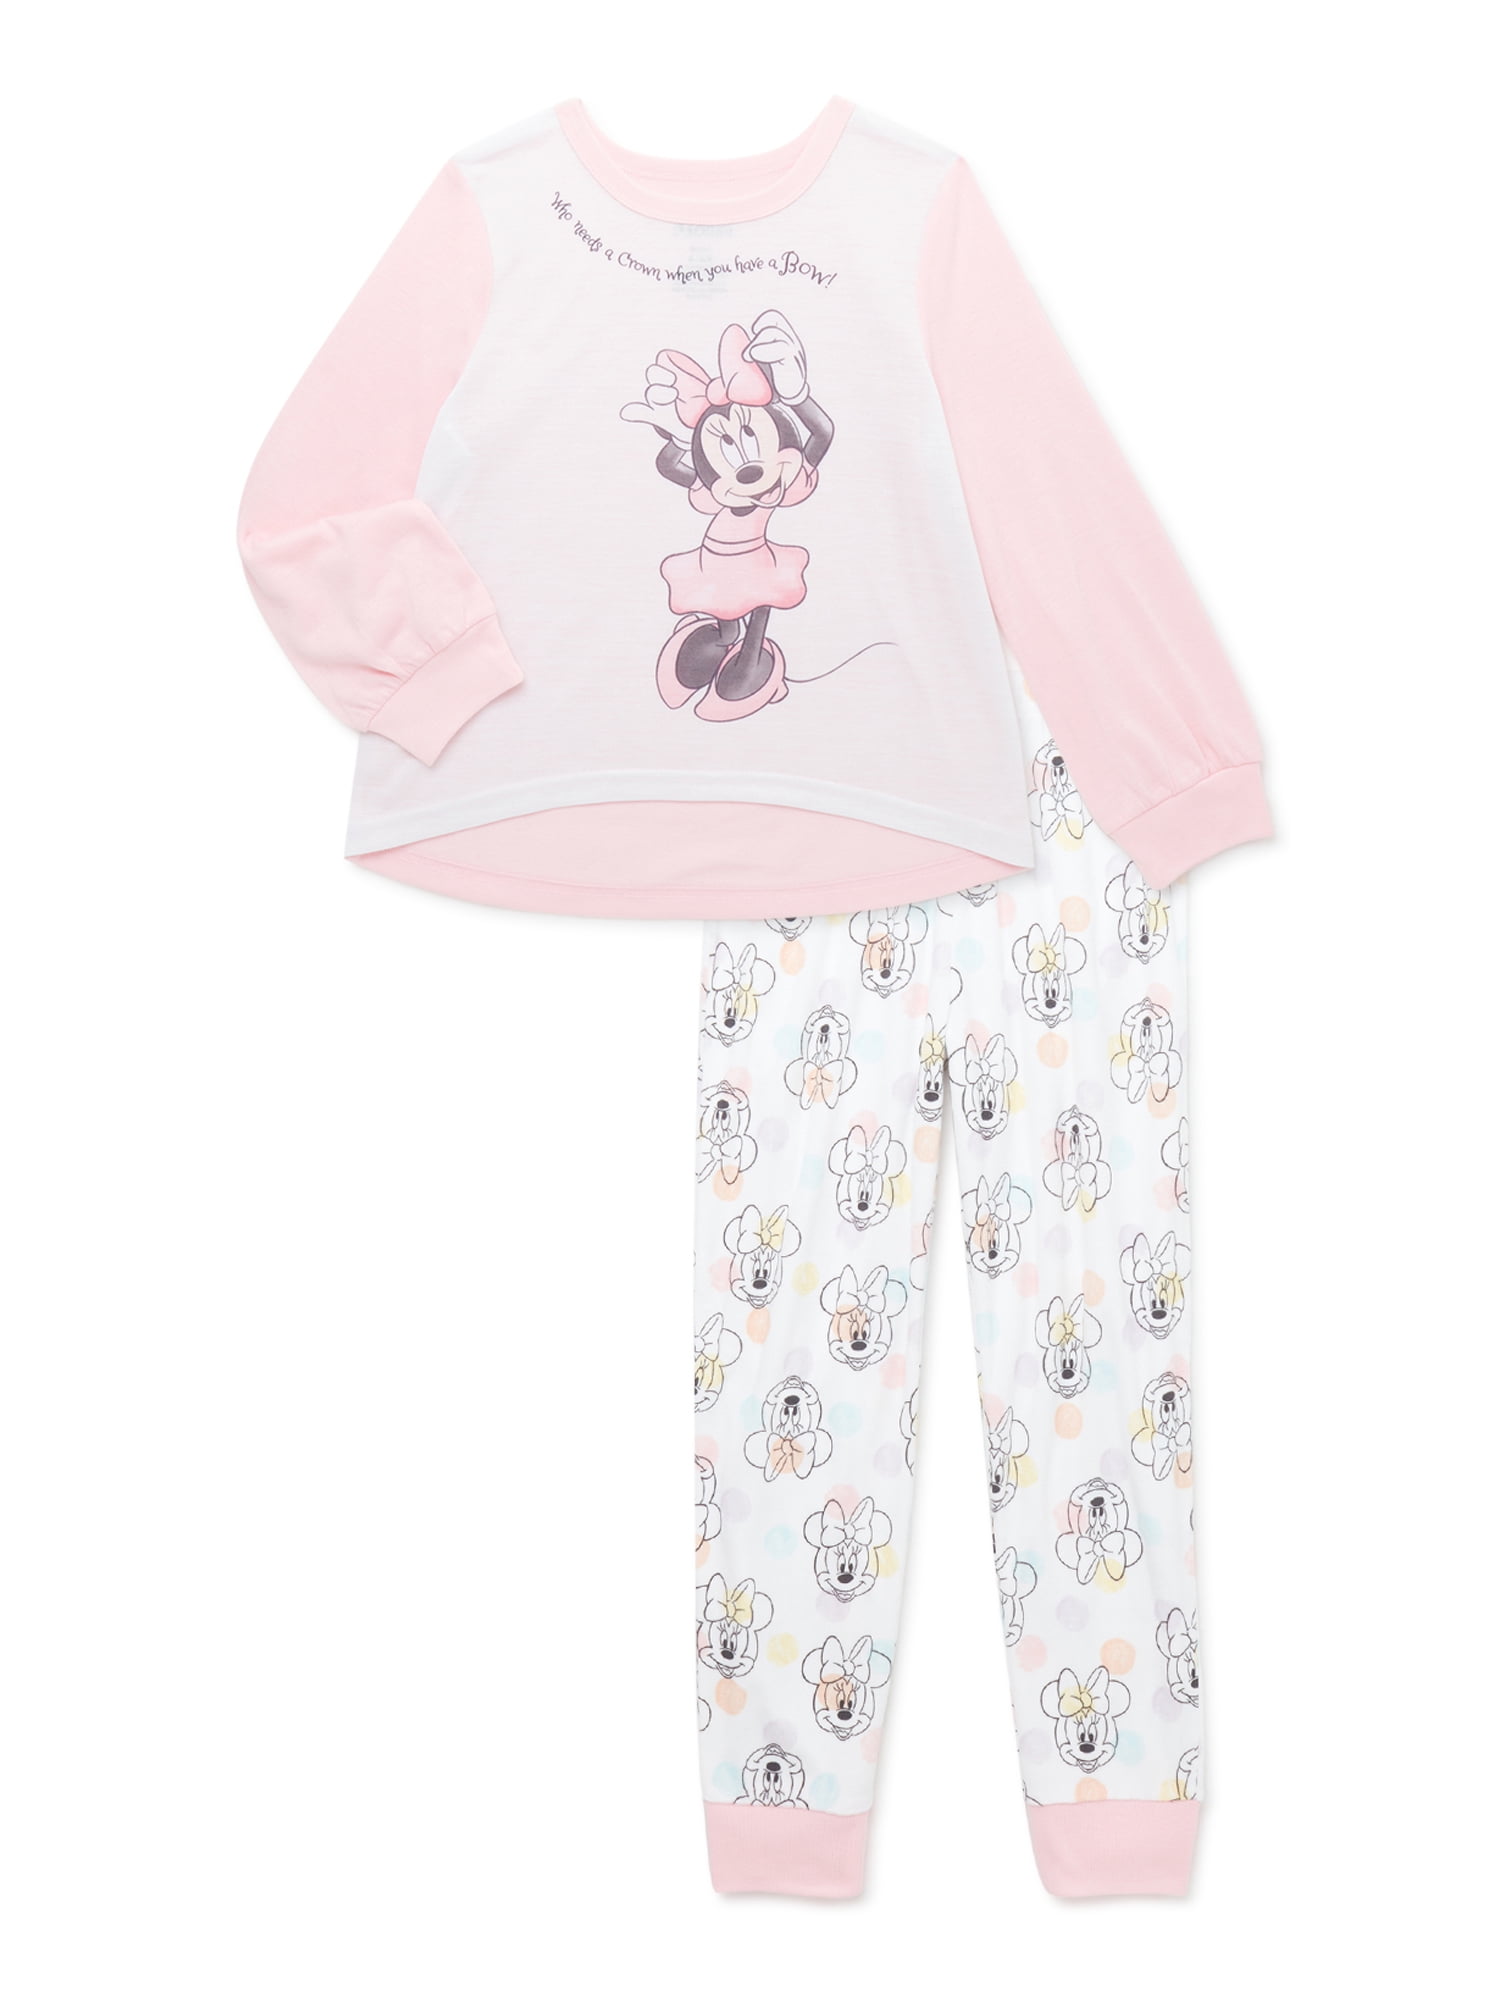 Choose Size Minnie Mouse 'Chic' Pyjama's Girls Character Pjs 5-12 Years 